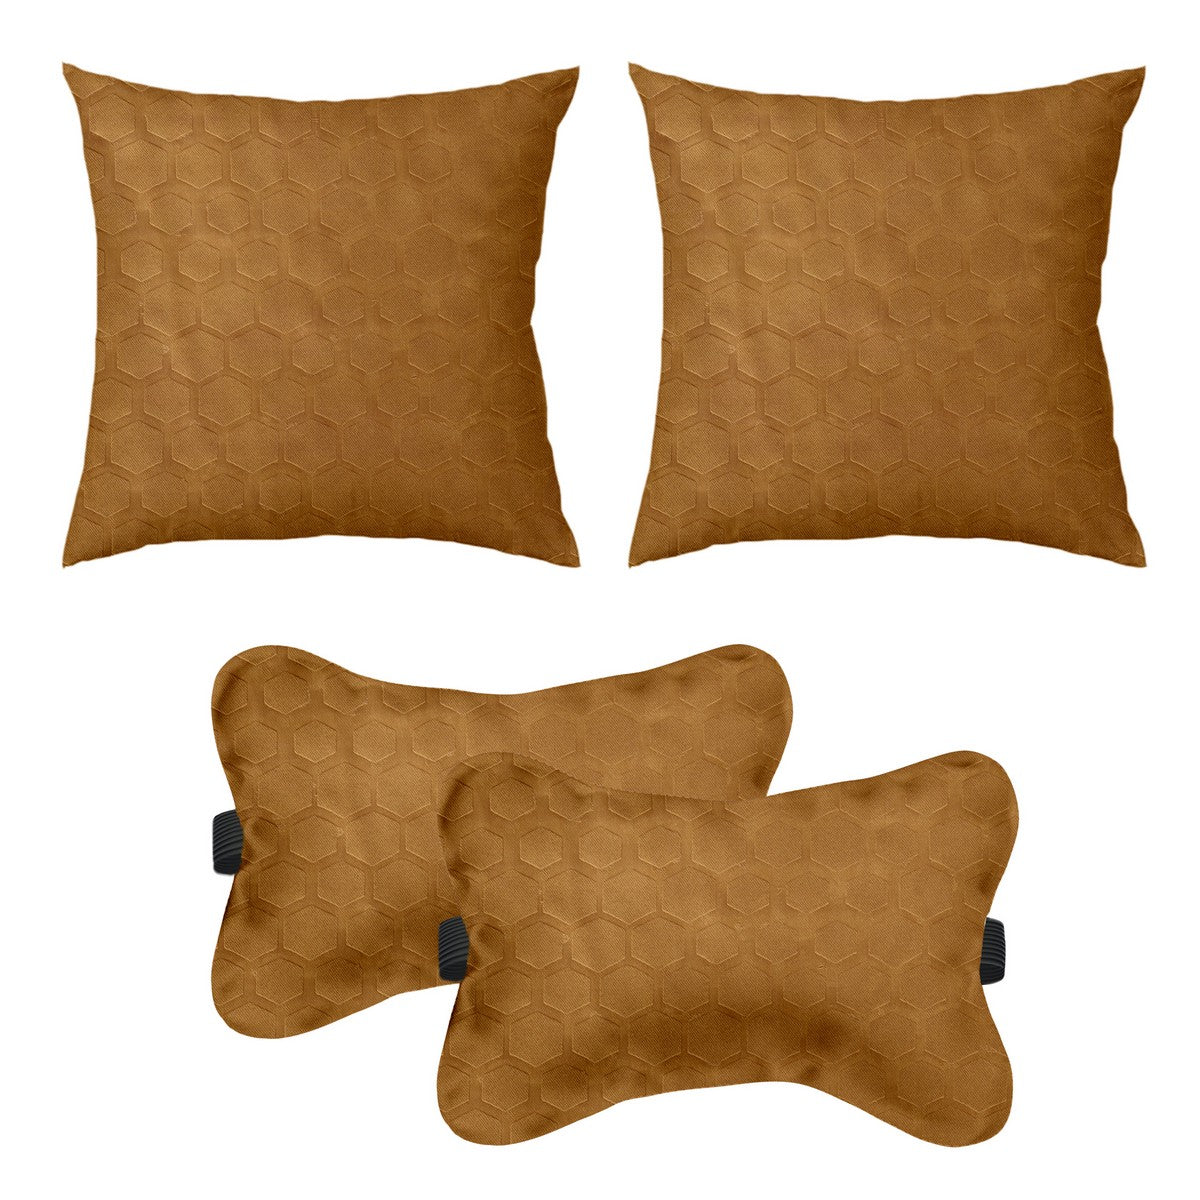 Car Cushion Pillows for Neck, Back and Seat Rest, Pack of 4, Embossed Leatherlike Fabric 100% Polyester Material, 2 PCs of Bone Neck Rest Size: 6x10 Inches, 2 Pcs of Car Cushion Size: 12x12 Inches, Beige,  by Lushomes